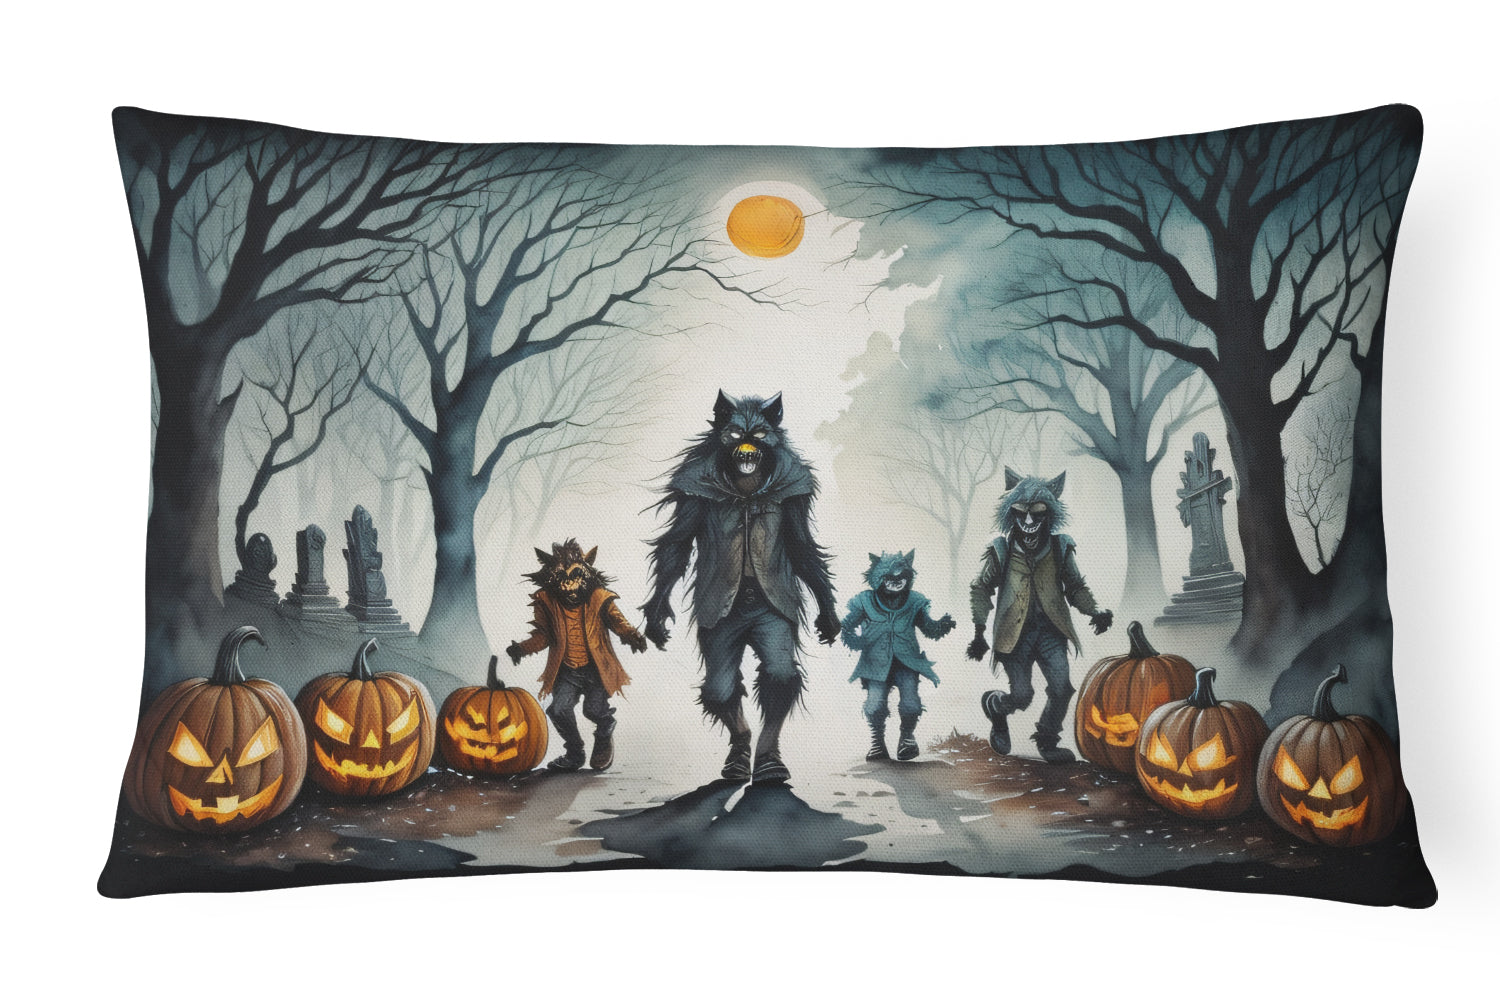 Buy this Werewolves Spooky Halloween Fabric Decorative Pillow